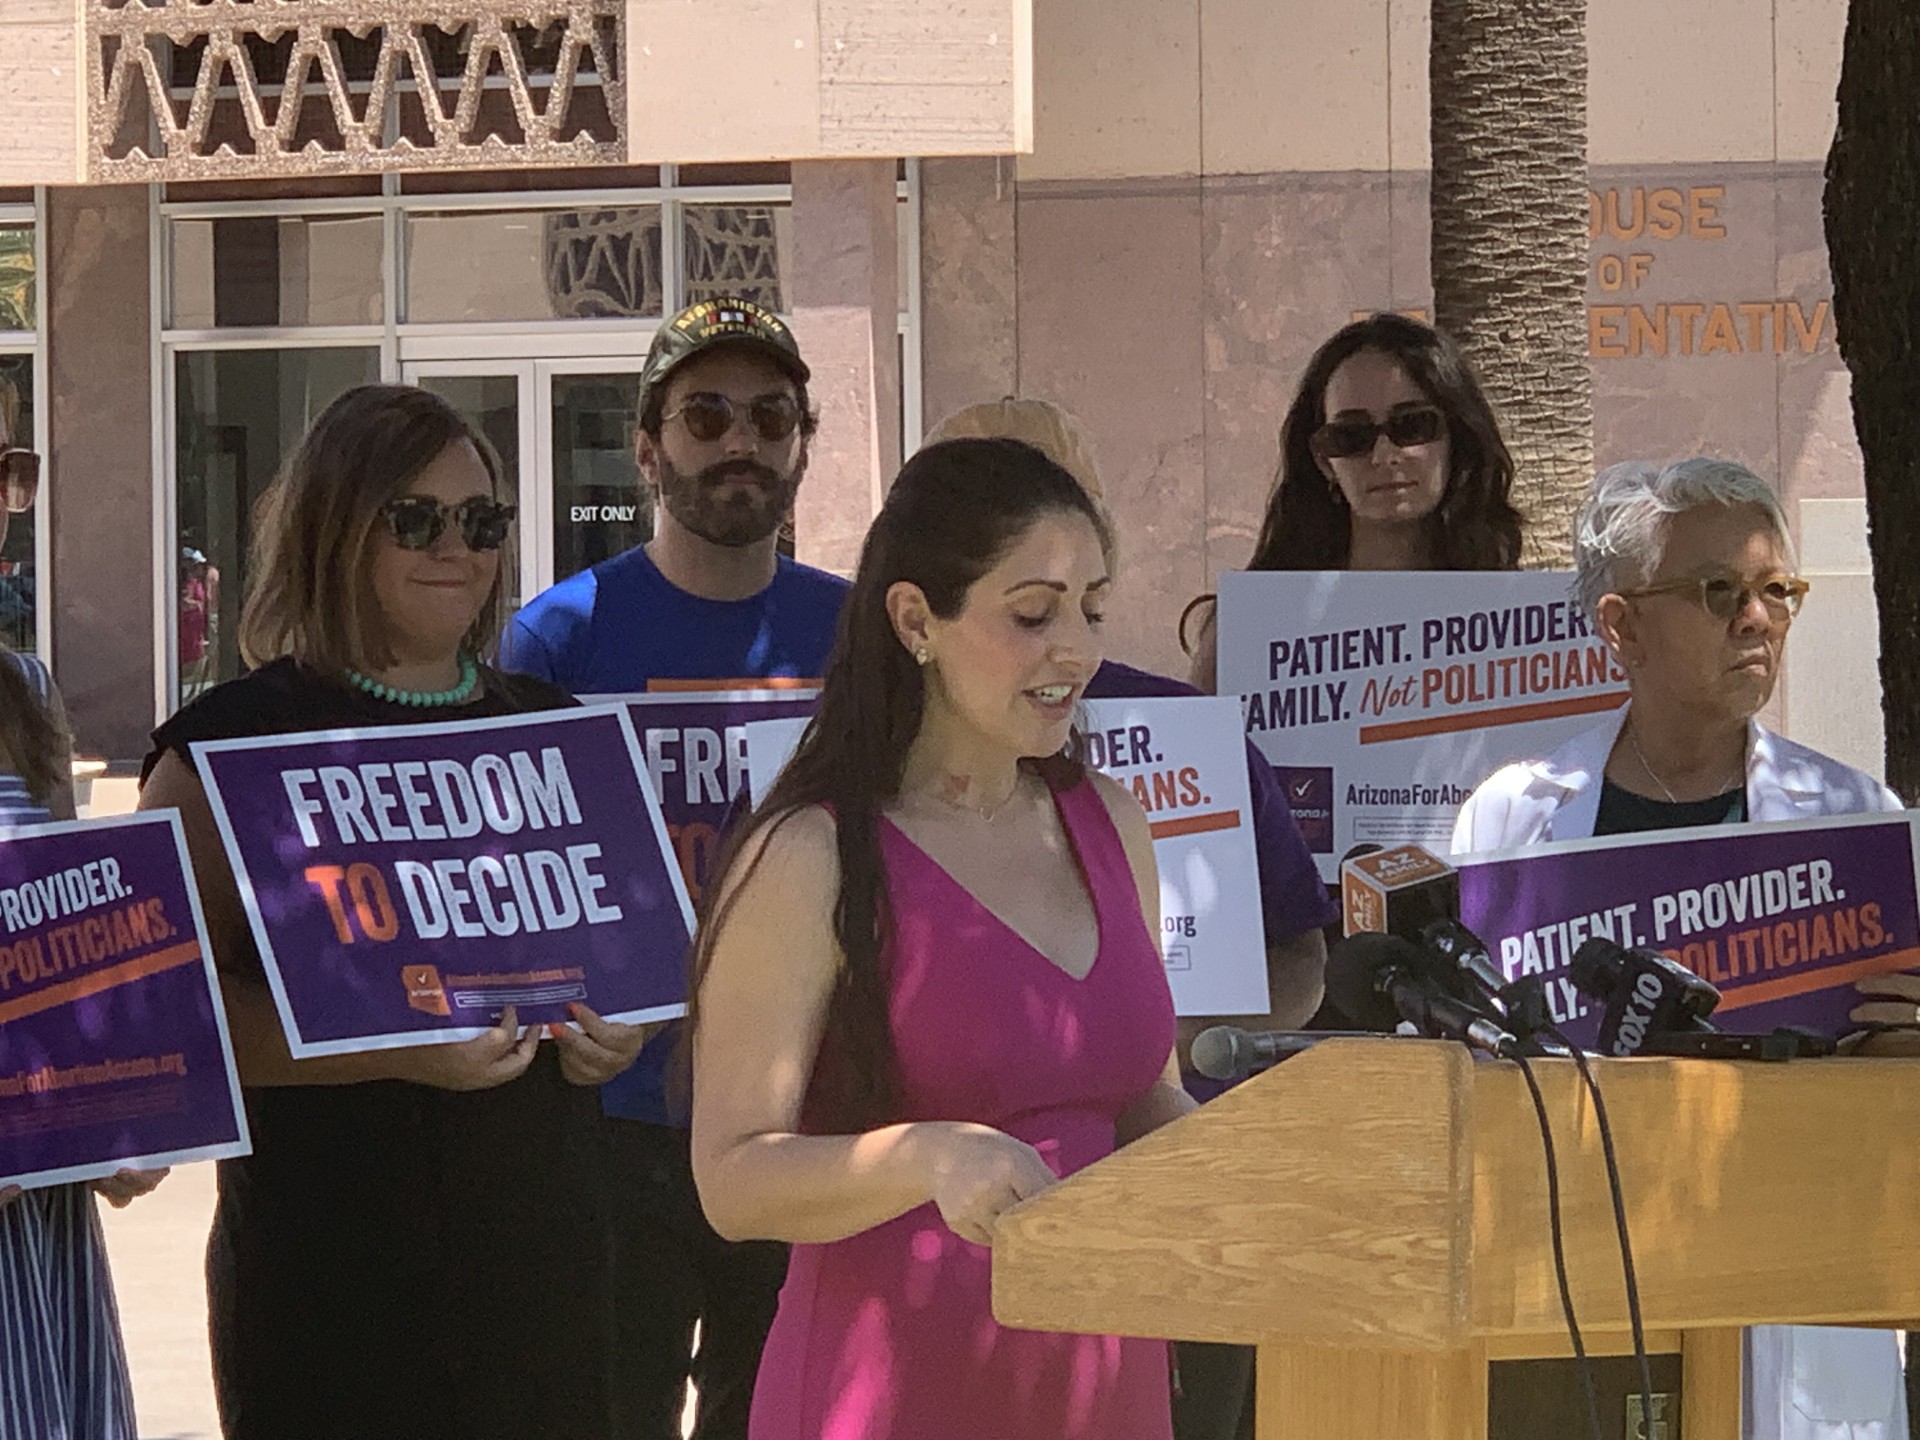 Health care providers gather at Arizona Capitol to show support for abortion ballot measure